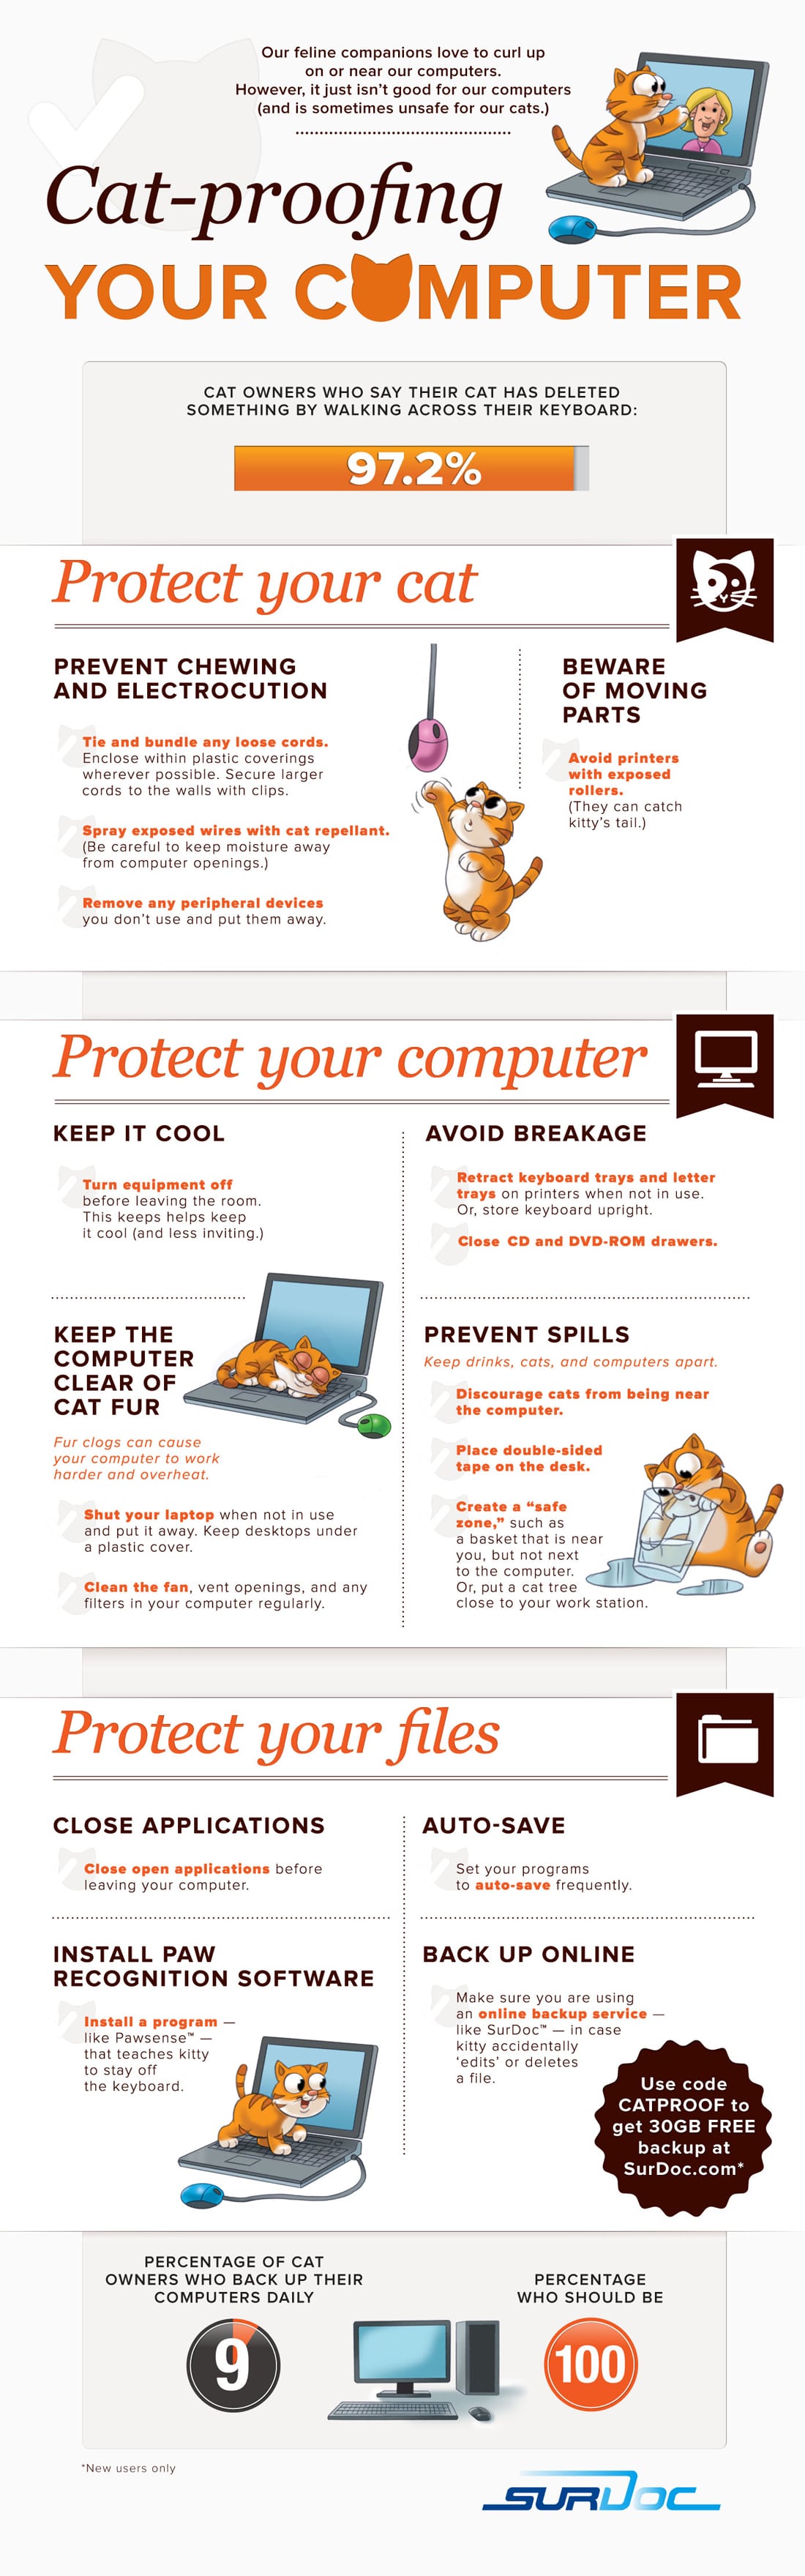 How To Cat-Proof Your Computer [Infographic]